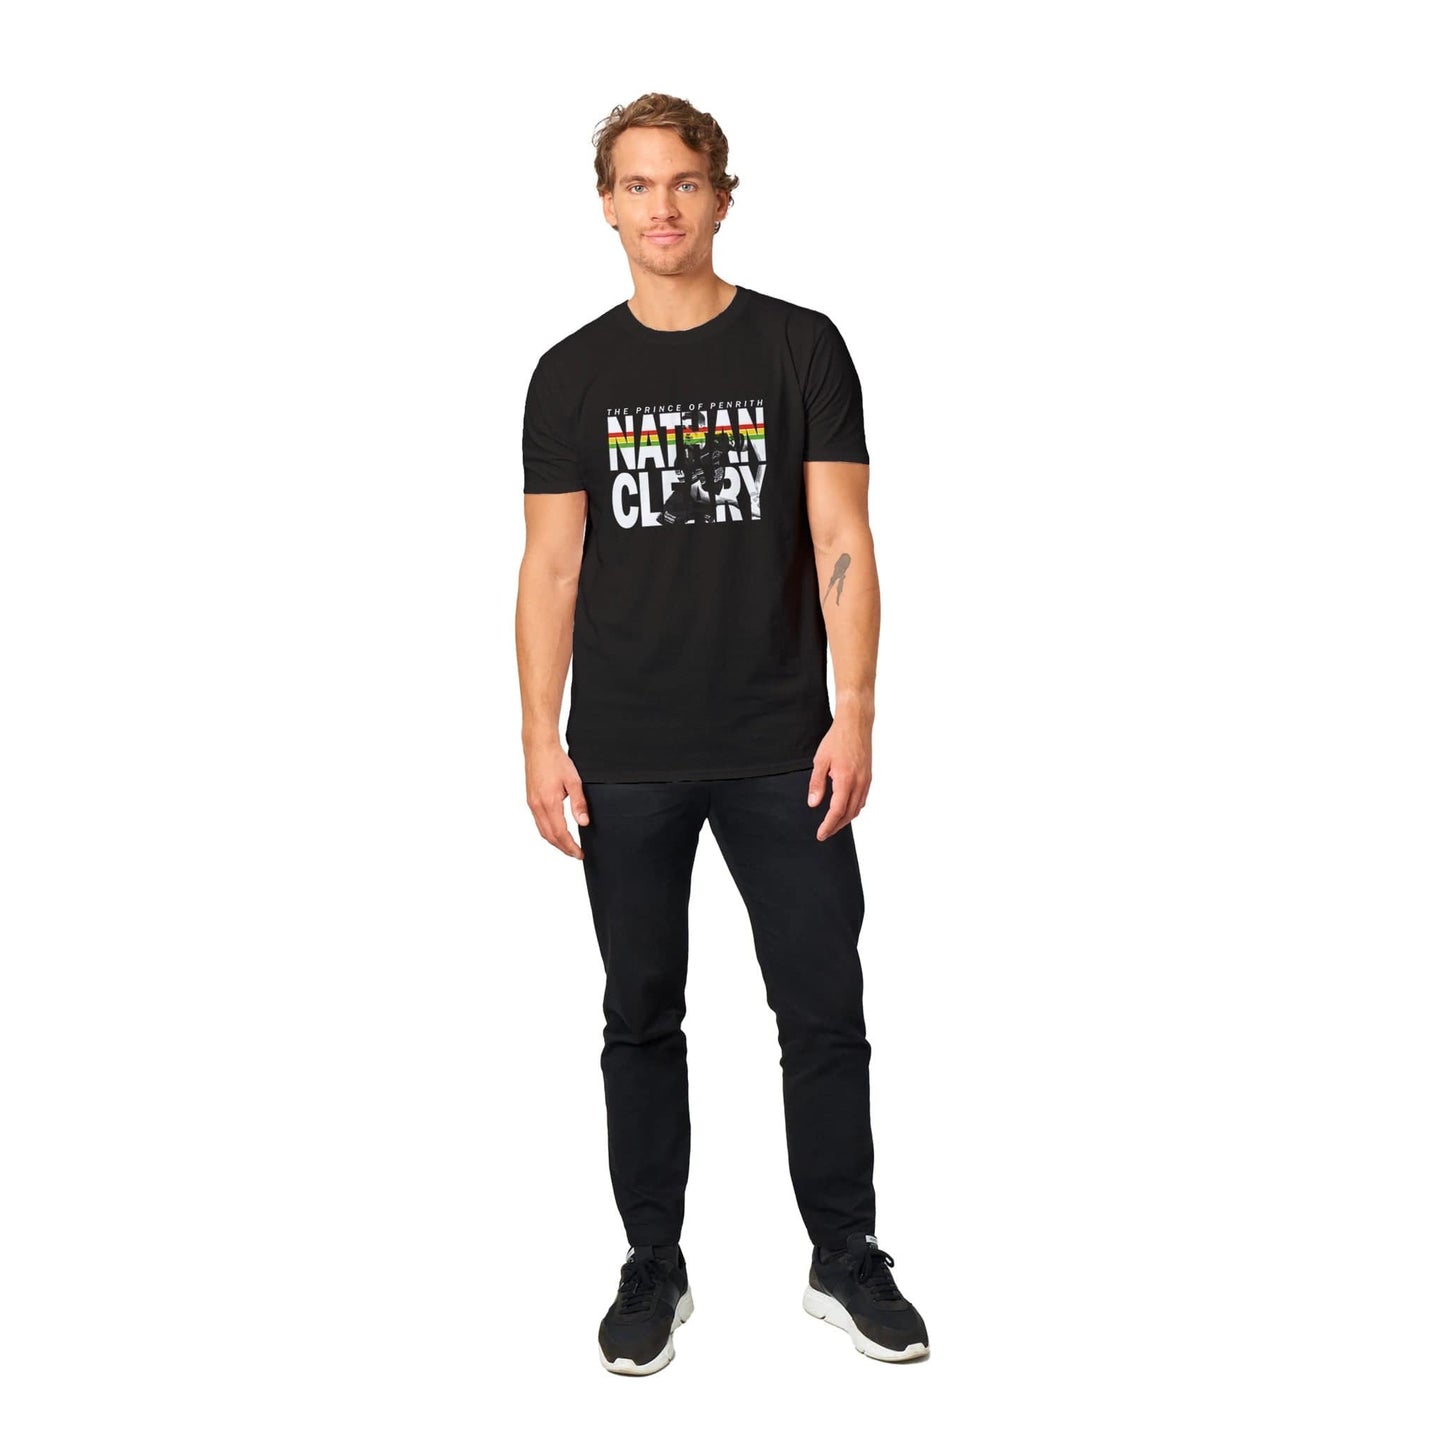 The Prince Of Penrith Cleary T-Shirt Graphic Tee Australia Online